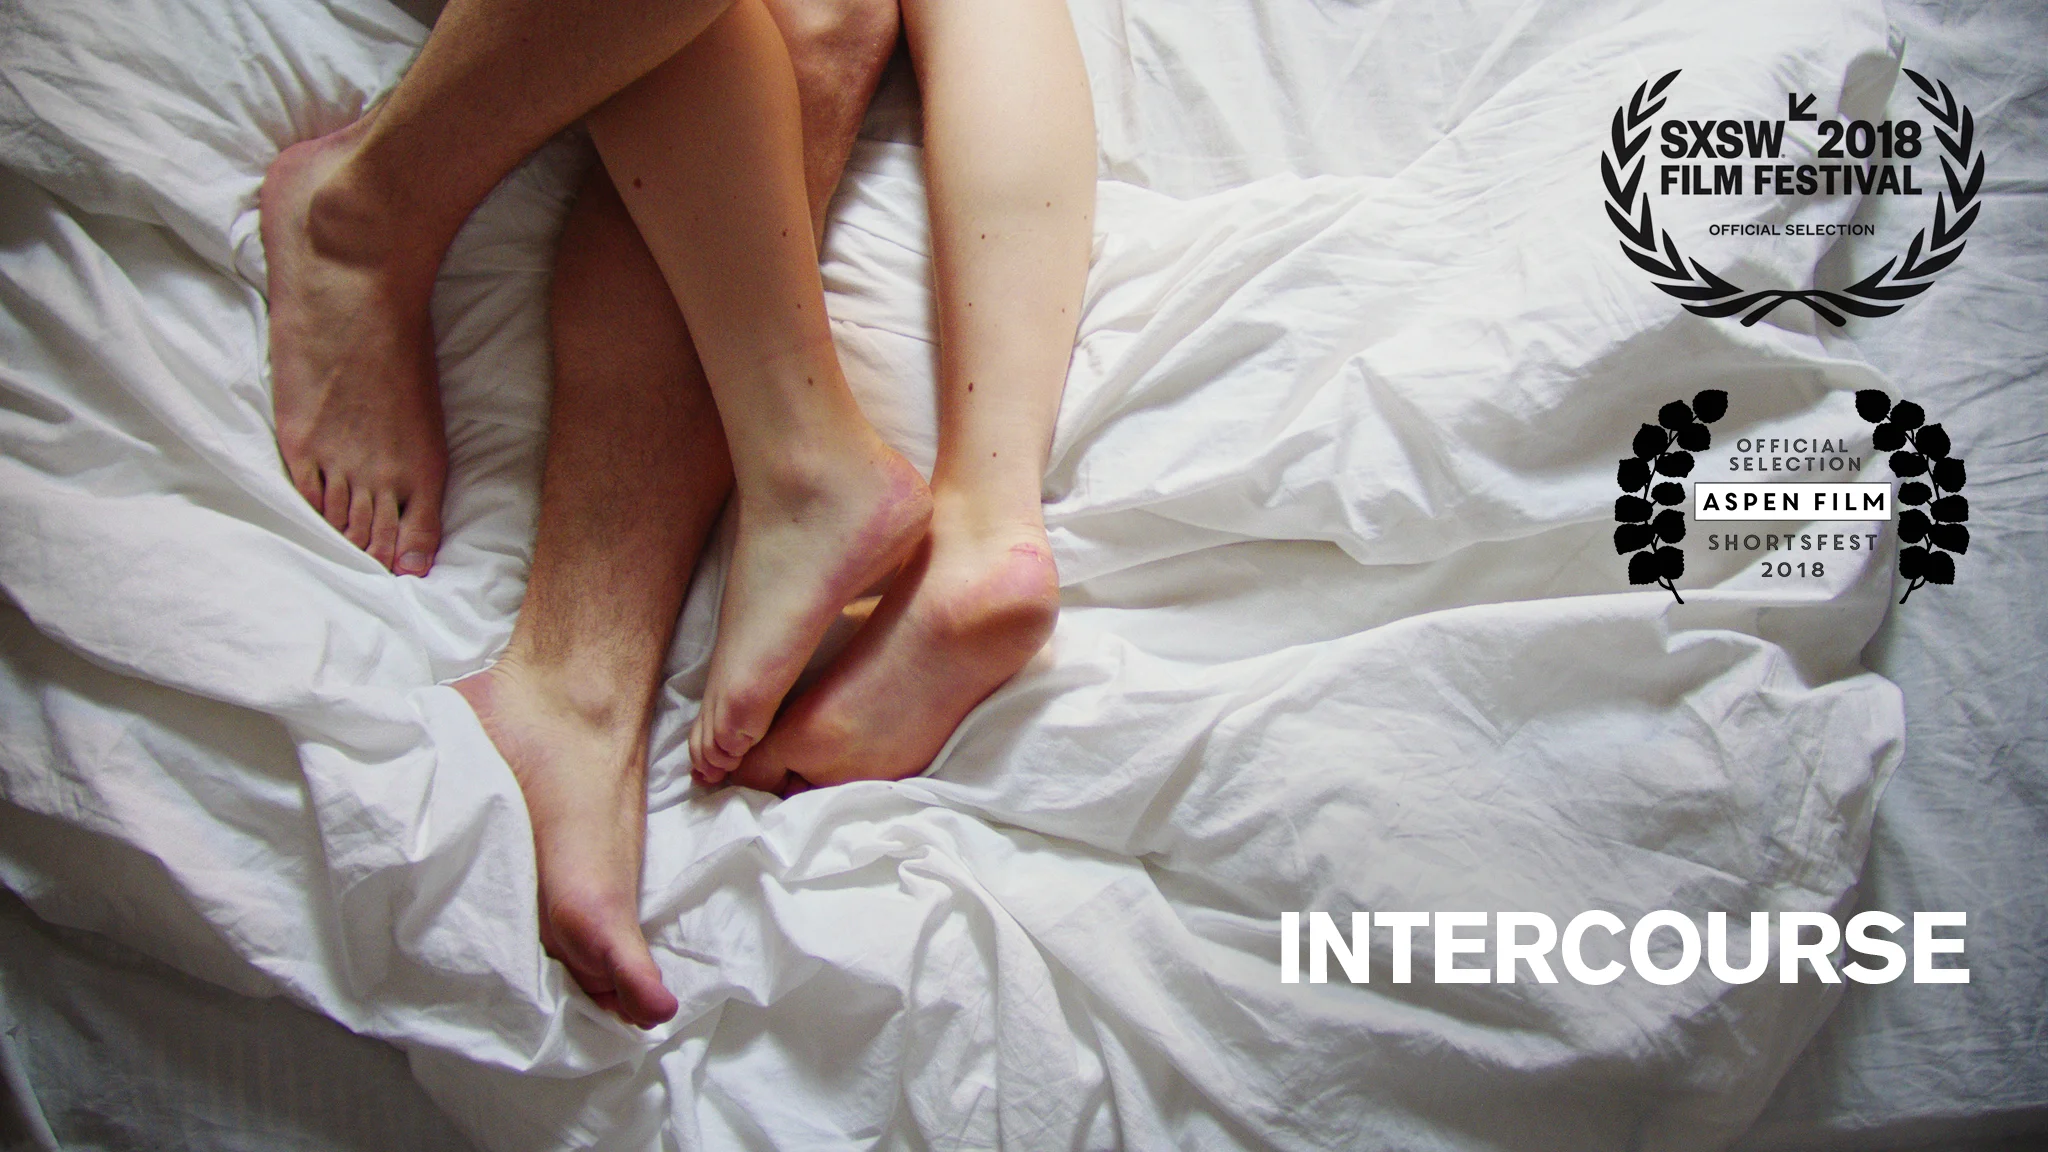 anthony iemmello recommends Images Of Intercourse